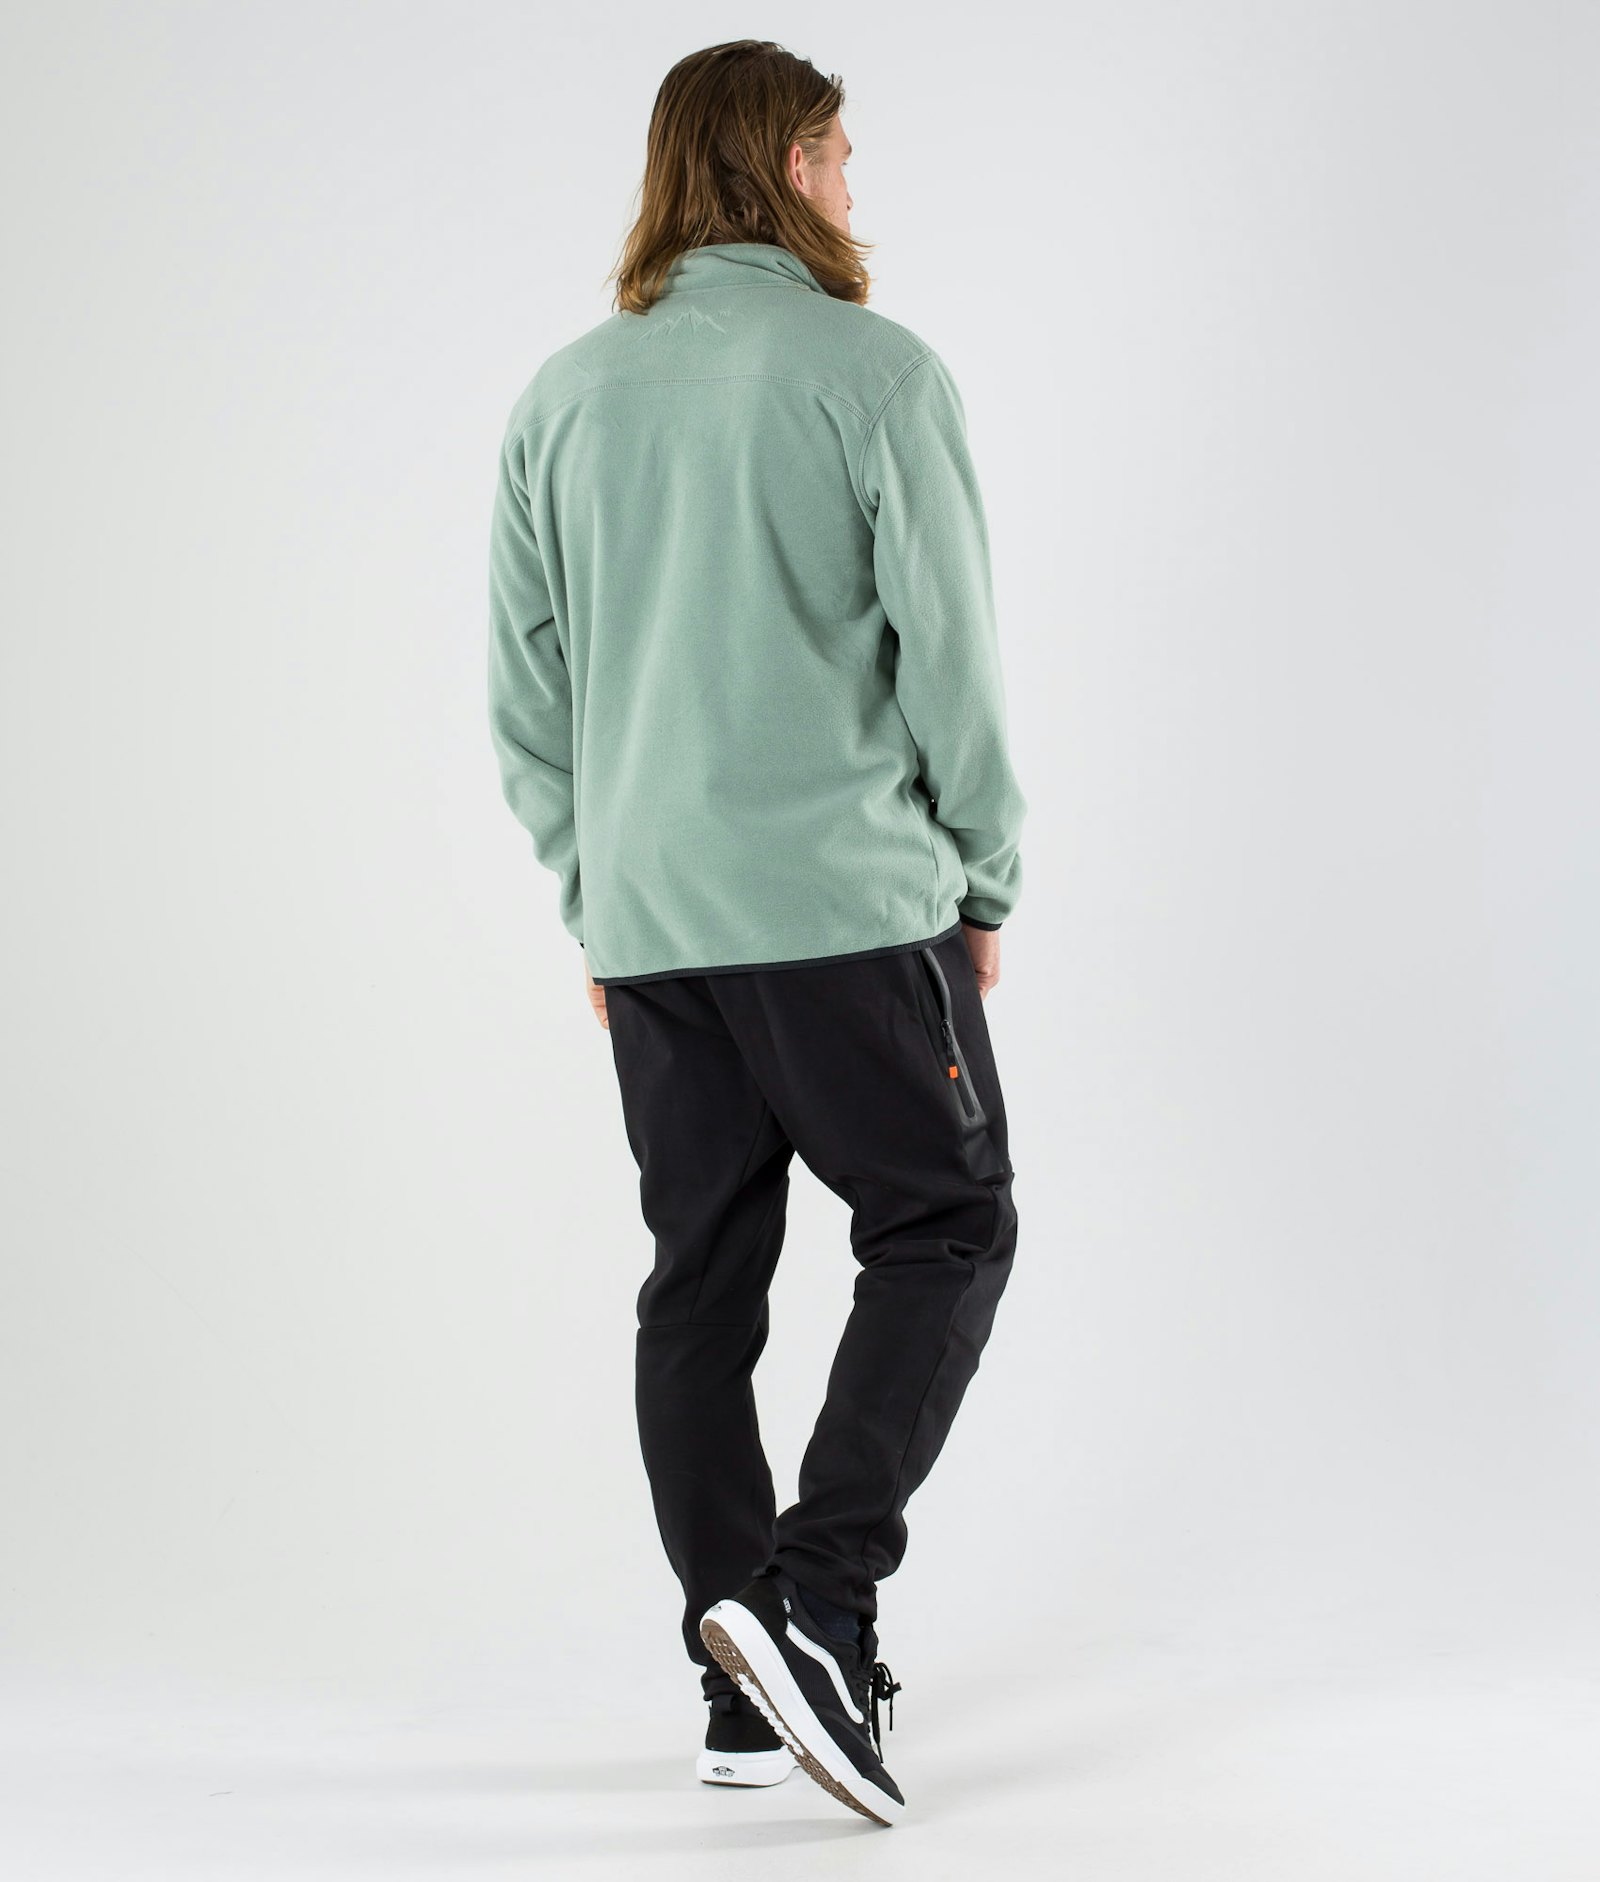 Loyd Polartec Sweat Polaire Homme Faded Green